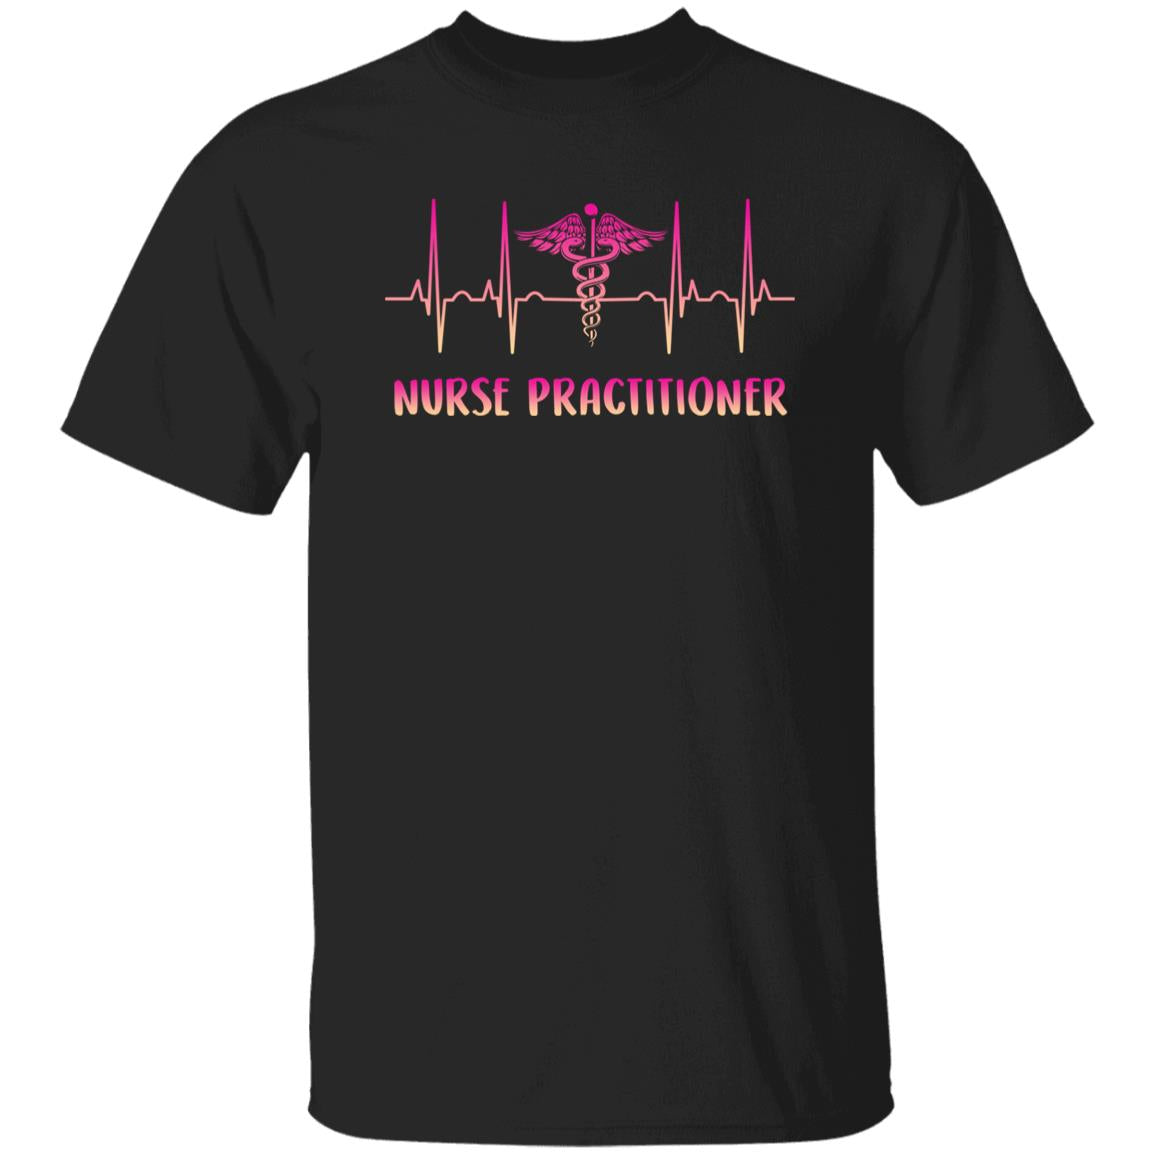 Nurse practitioner Heartbeat T-Shirt NP Family Nurse Practitioner heart beat Unisex Tee Black Navy Dark Heather-Family-Gift-Planet